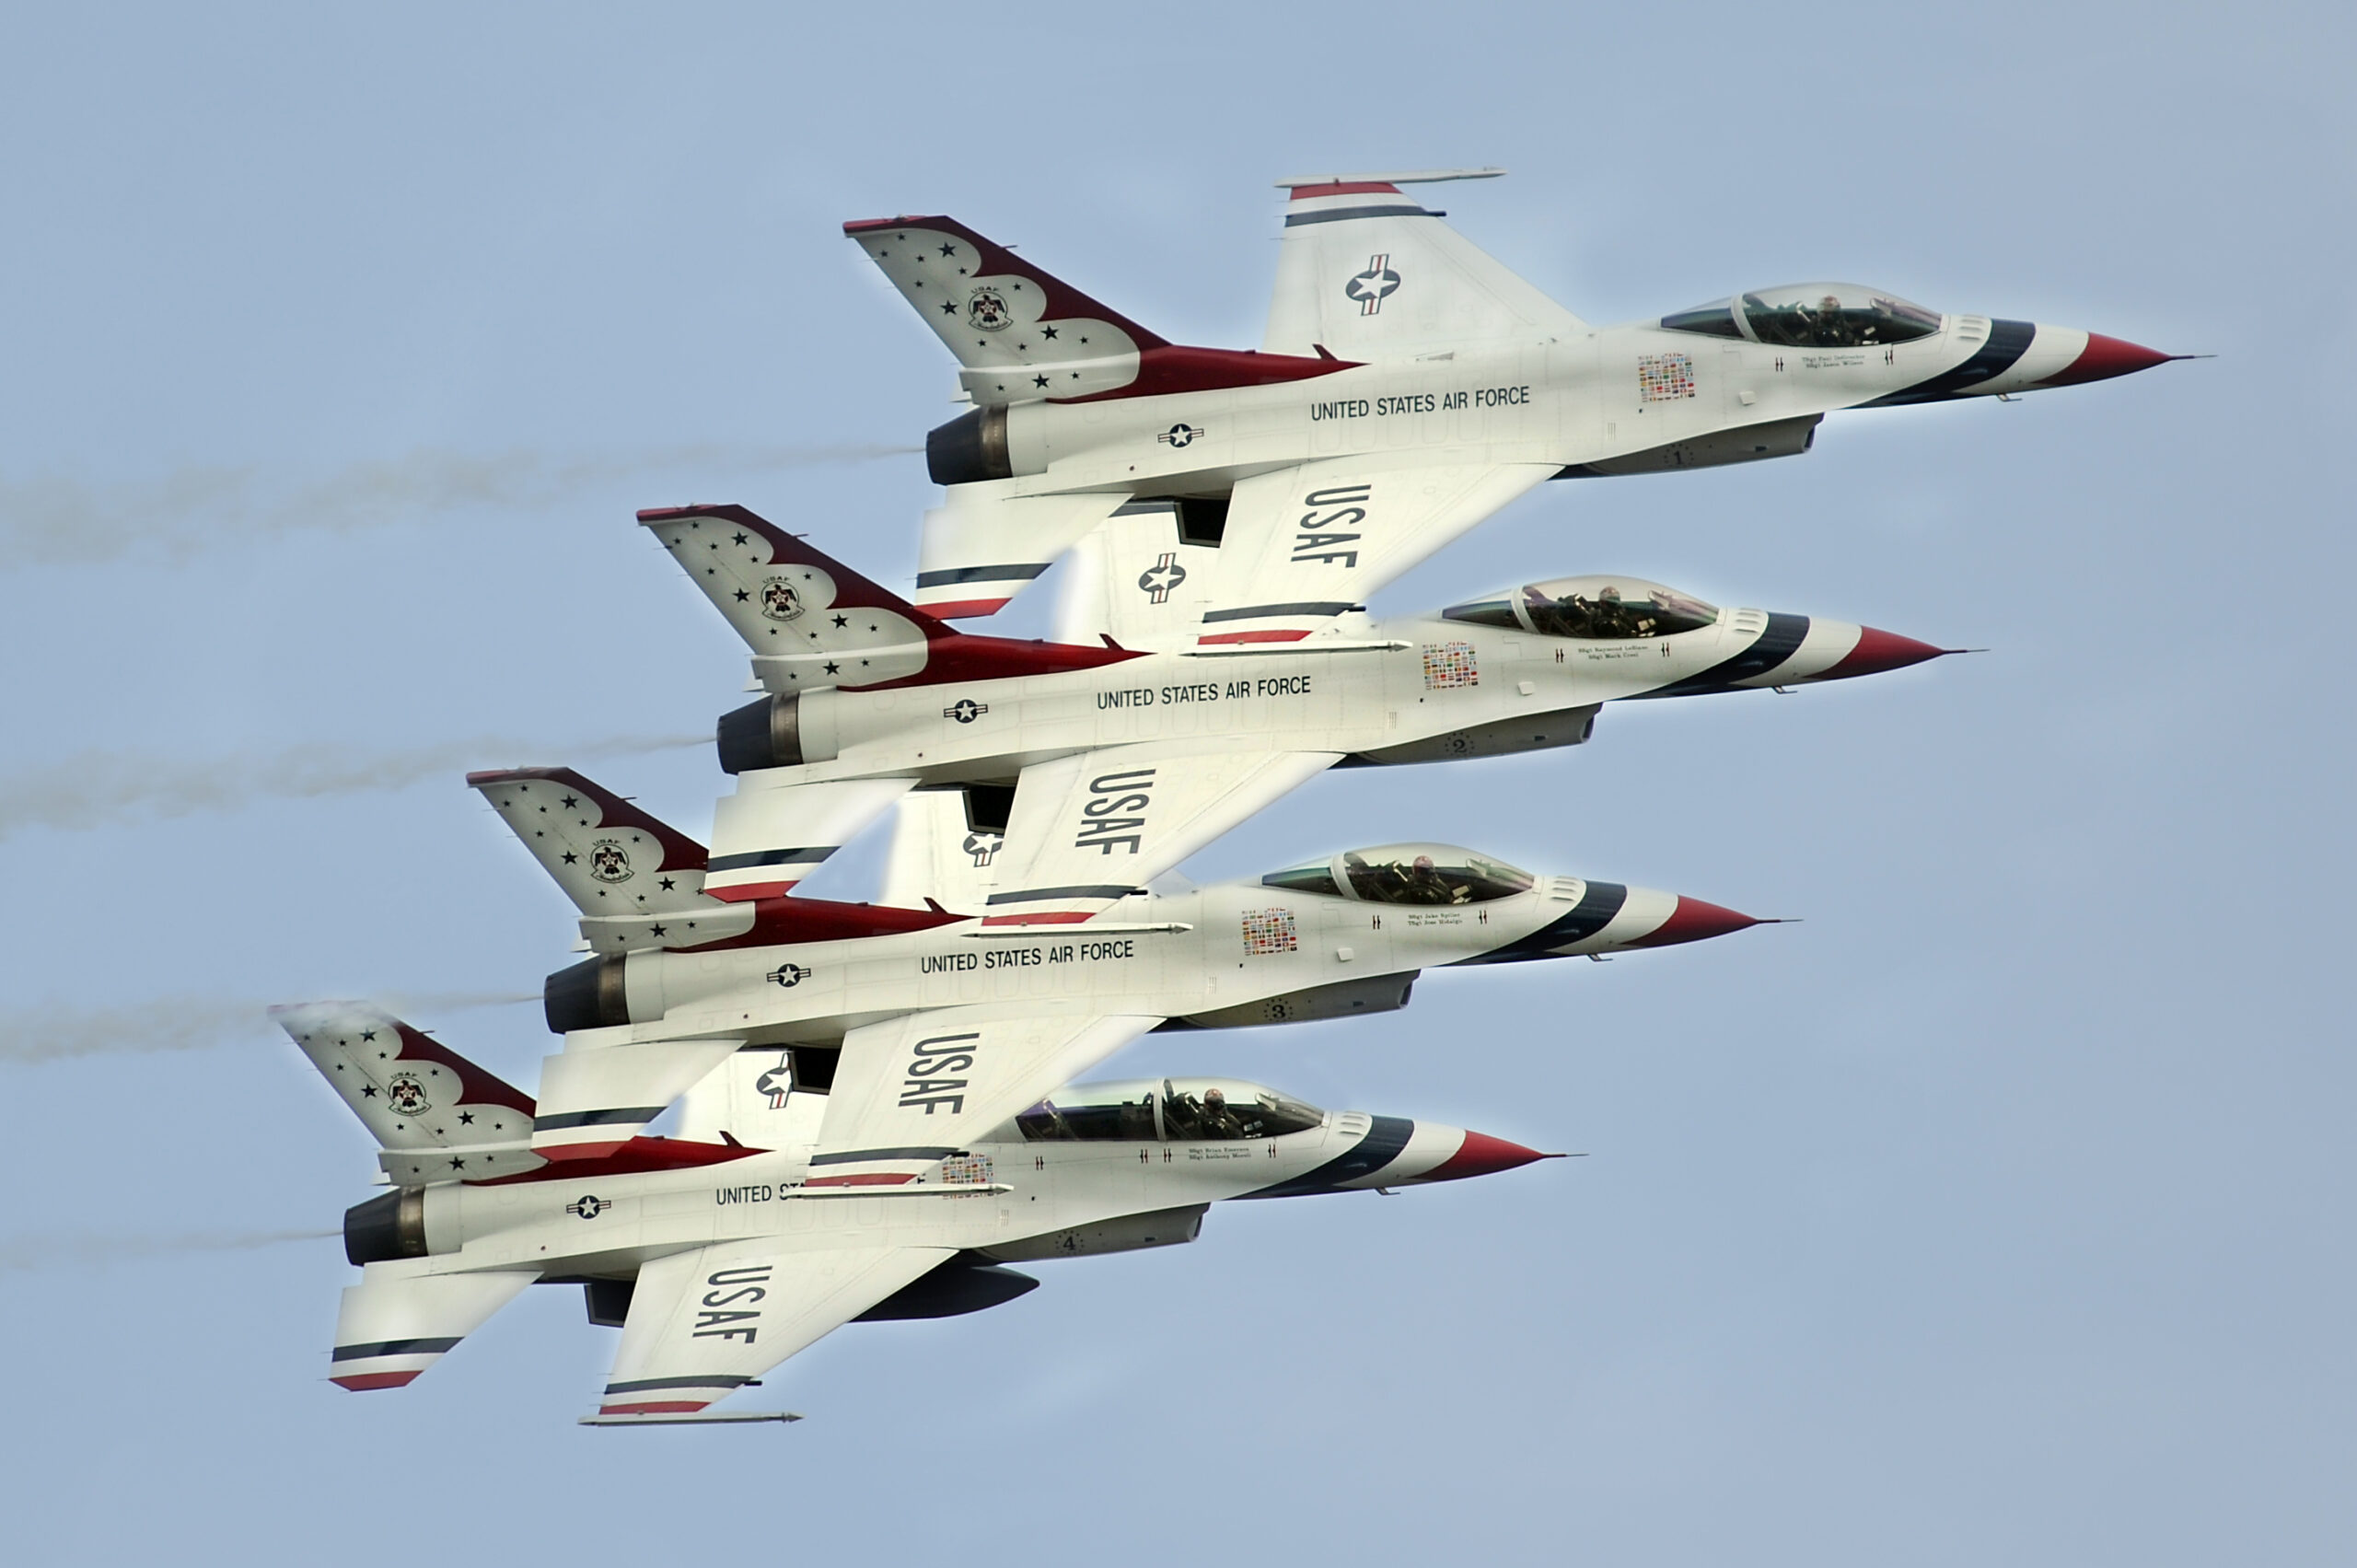 Duluth Airshow - United States Air Force Thunderbirds